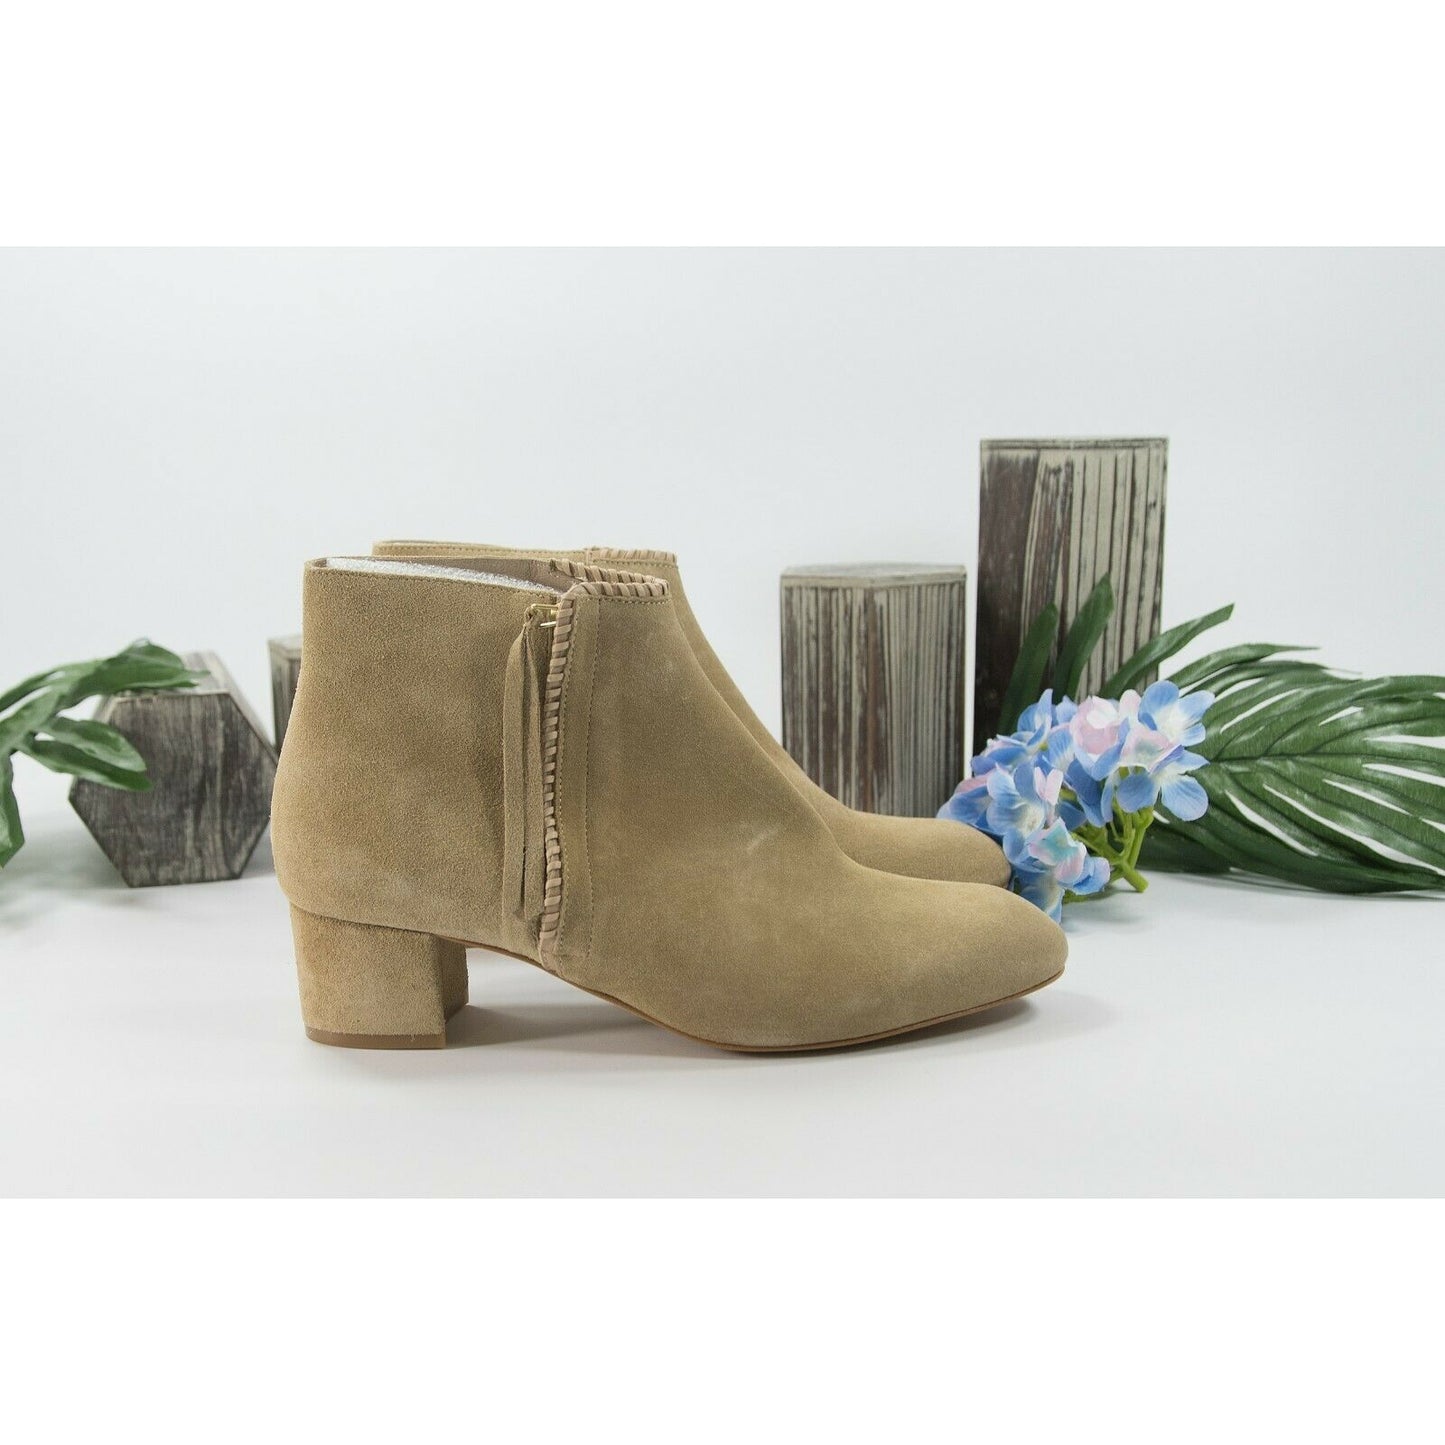 Maje Camel Suede Felicia Bootie Ankle Boot Shoes Sz 40 10